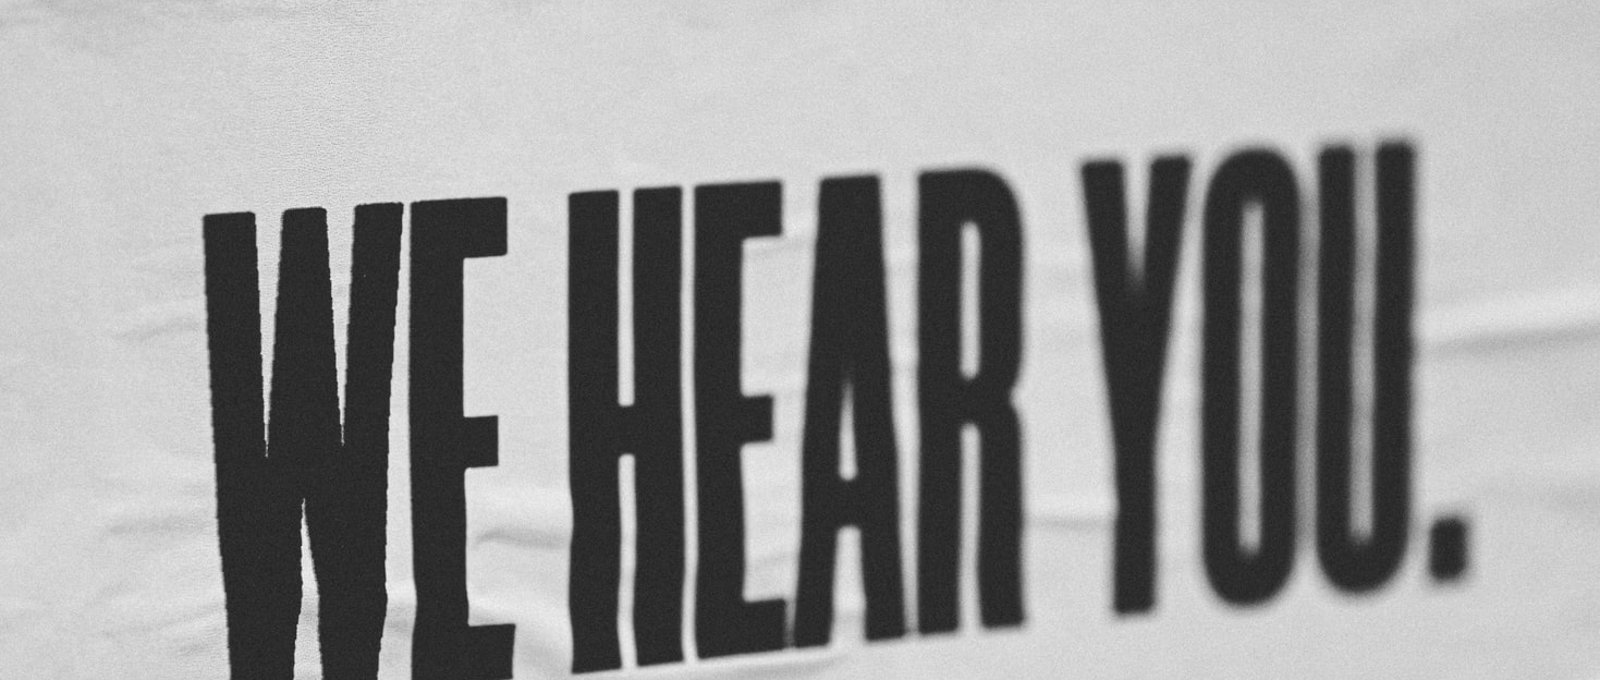 Photo of a banner that reads 'We hear you'